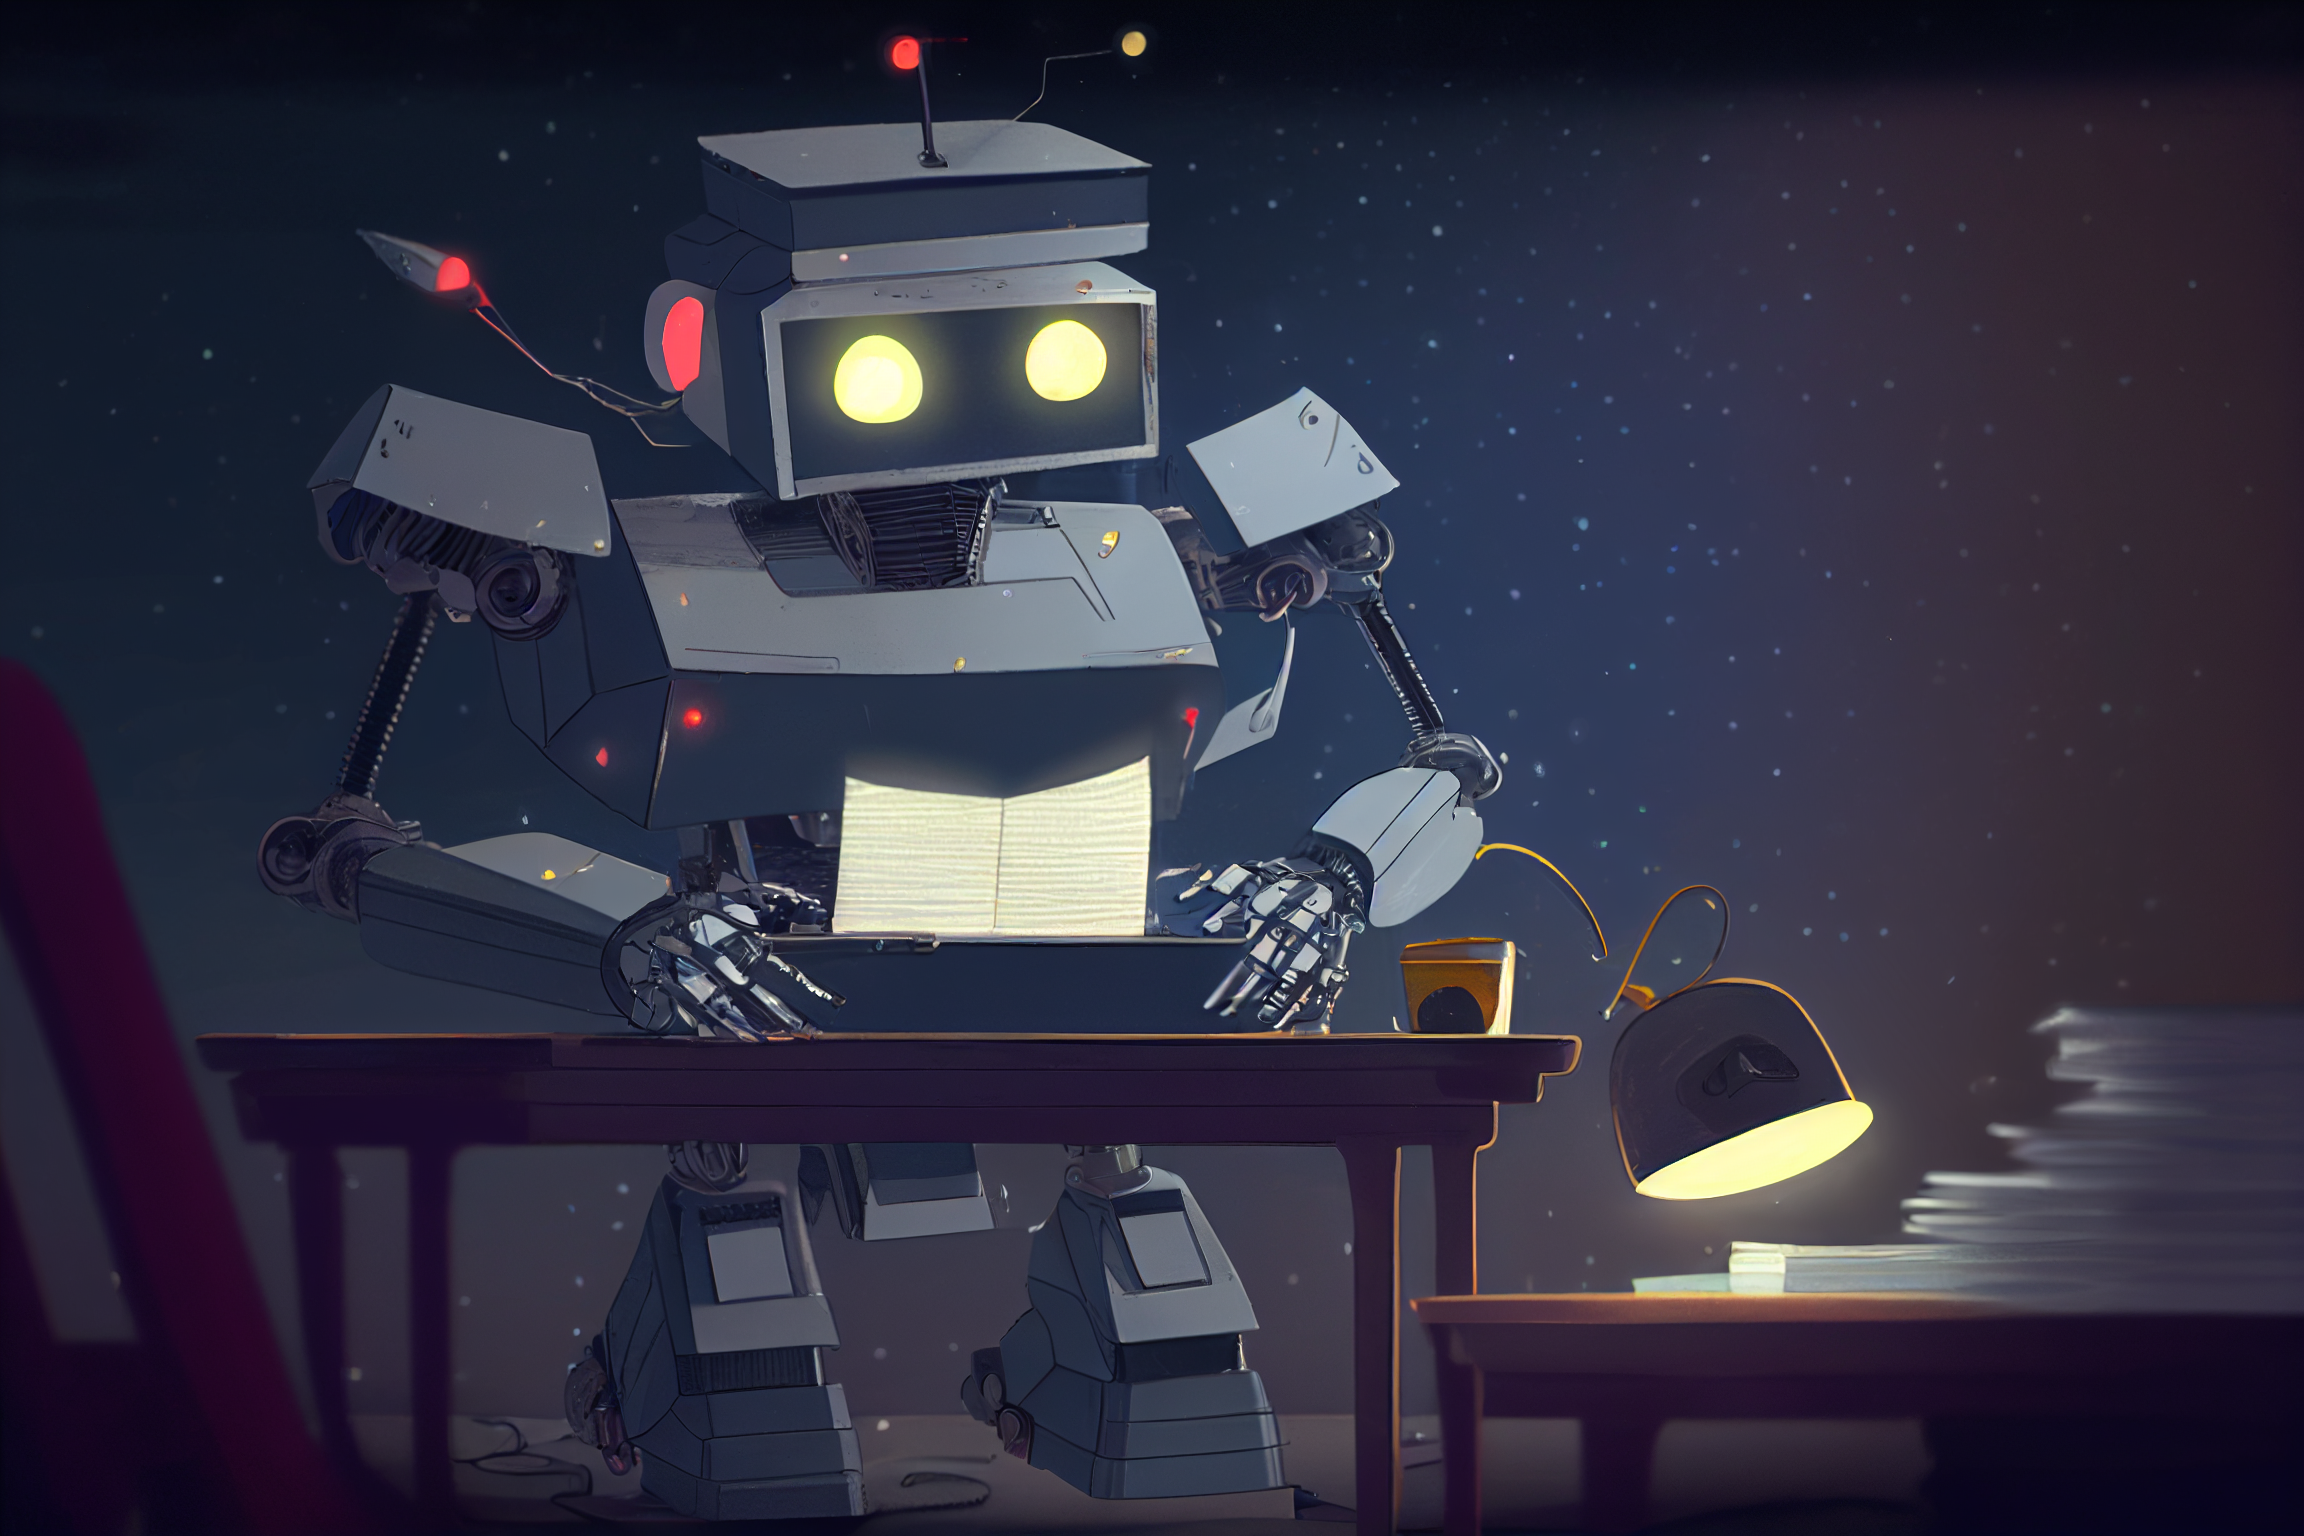 Cartoon style robot at a table looking at a typewriter.